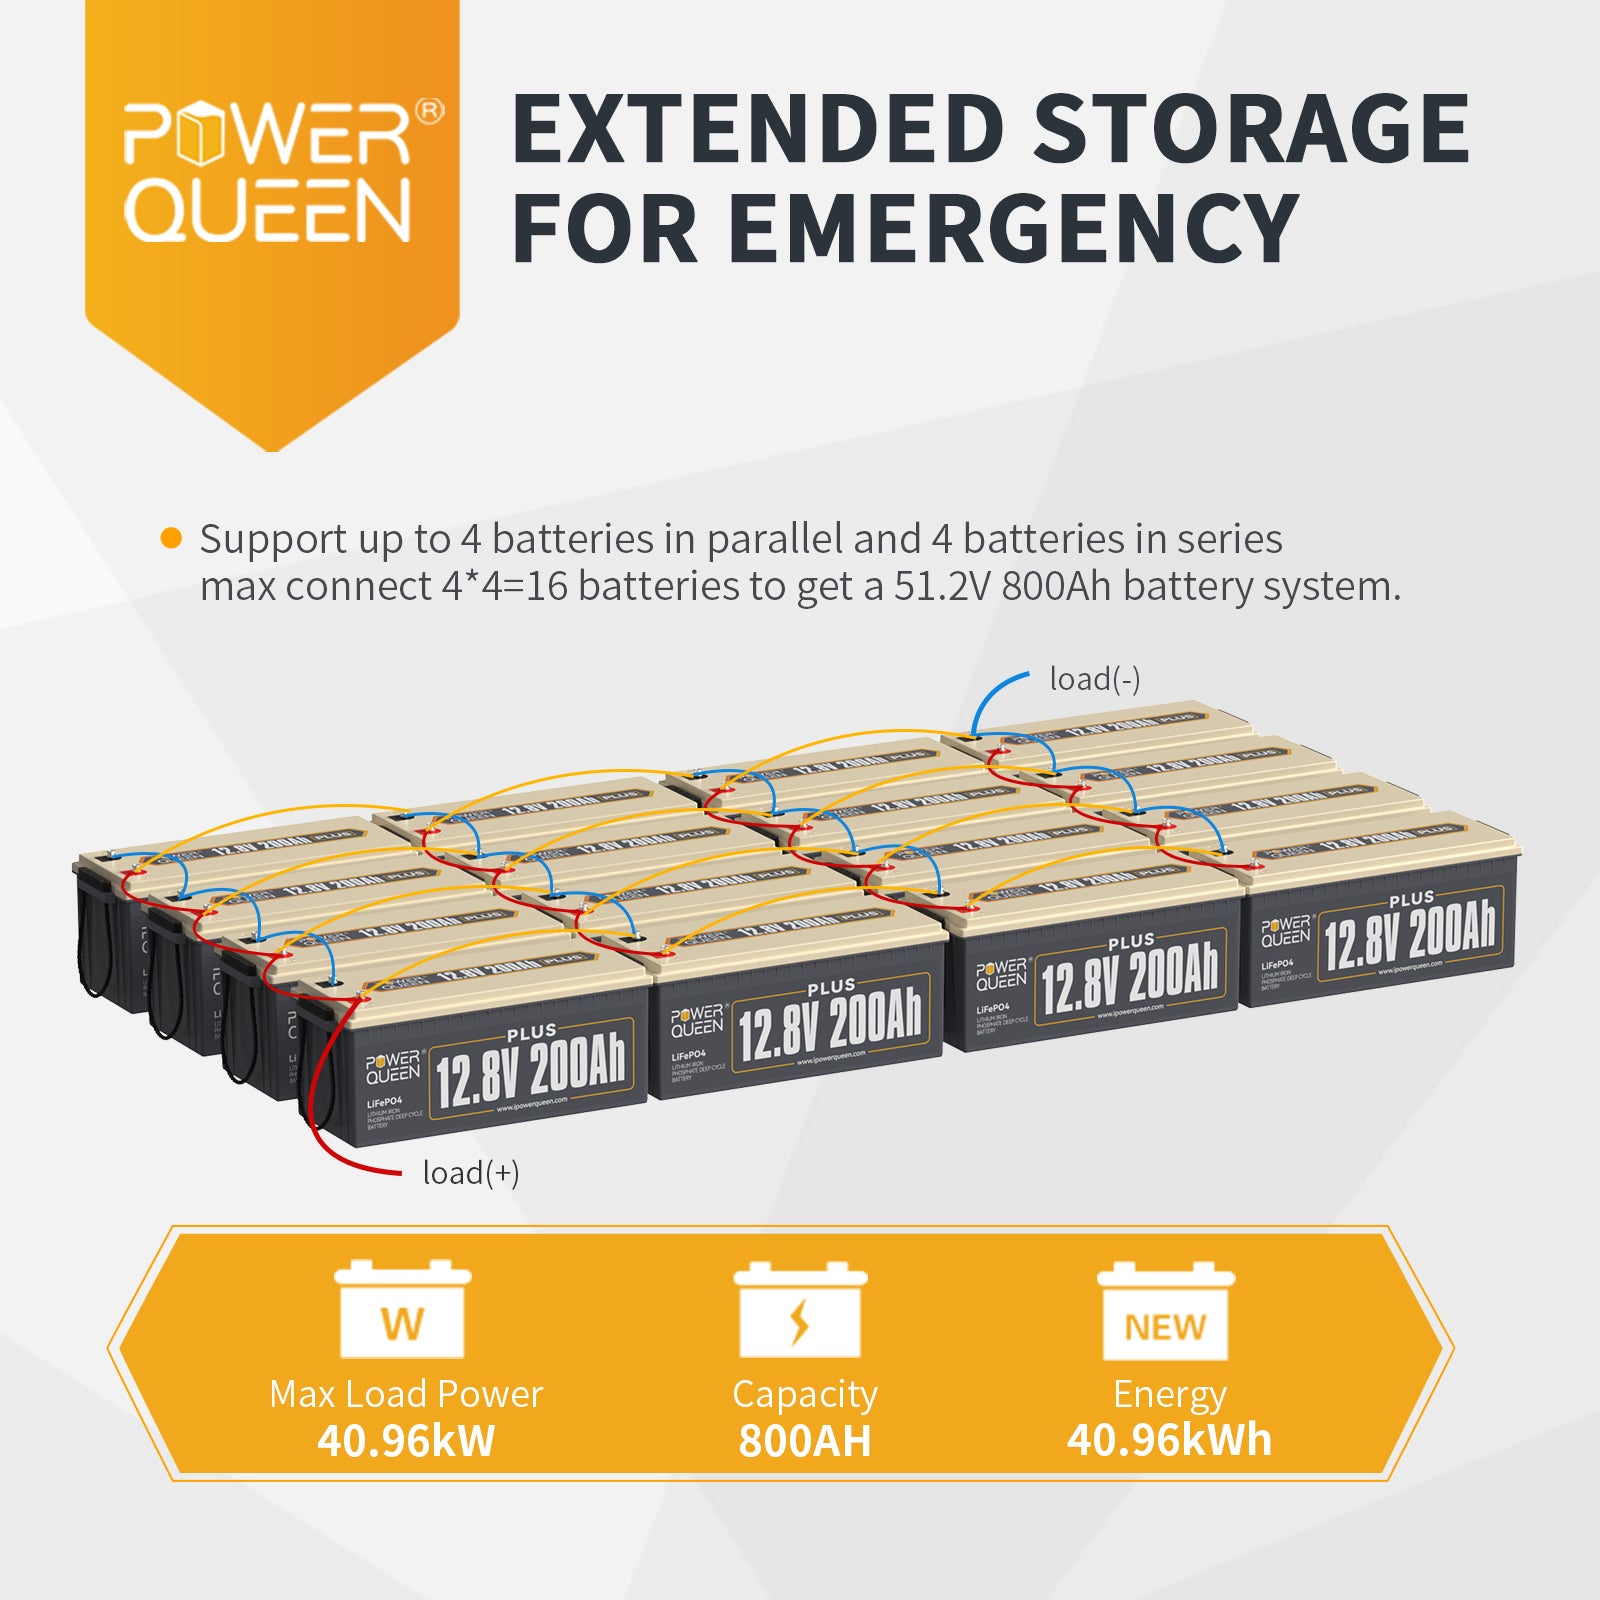 Power Queen 12.8V 200Ah Plus LiFePO4 Battery,Built-in 200A BMS